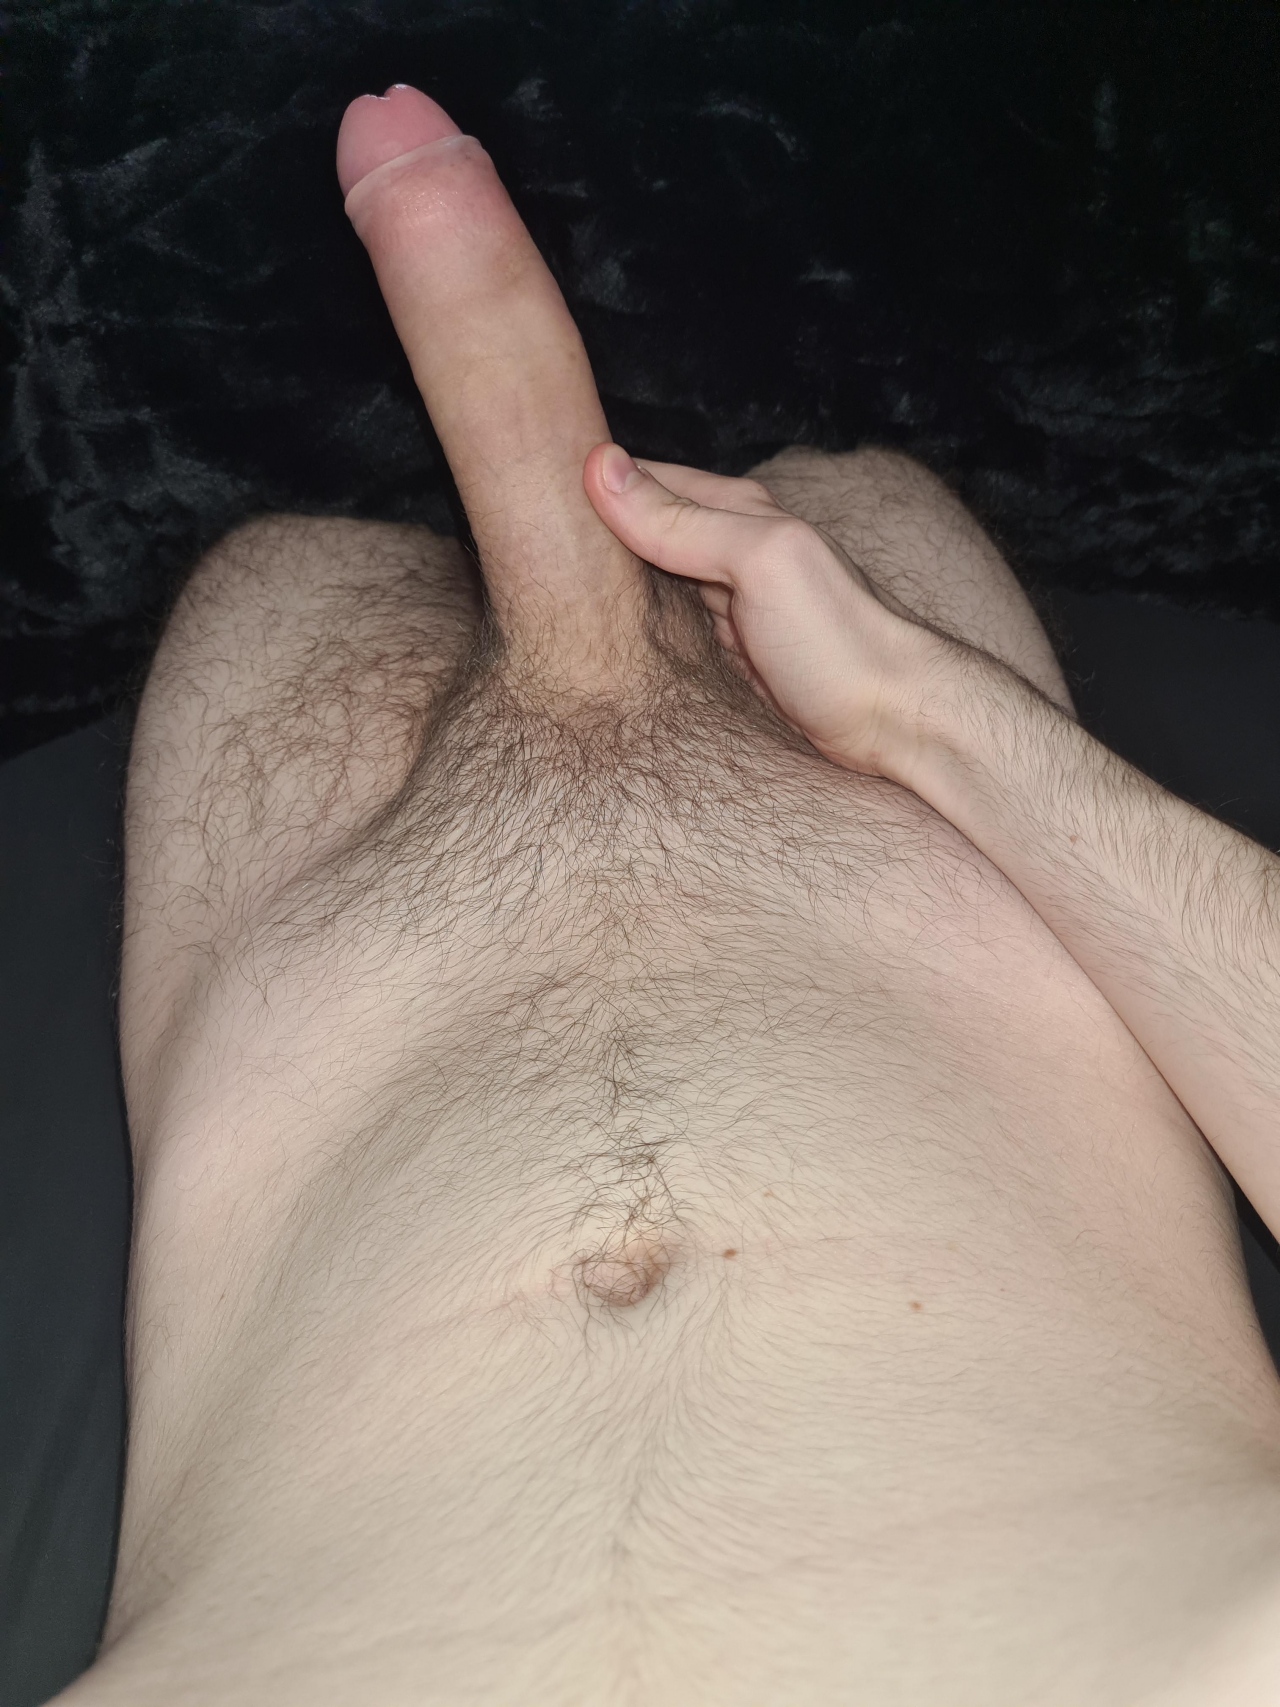 Big cock with pubic hair